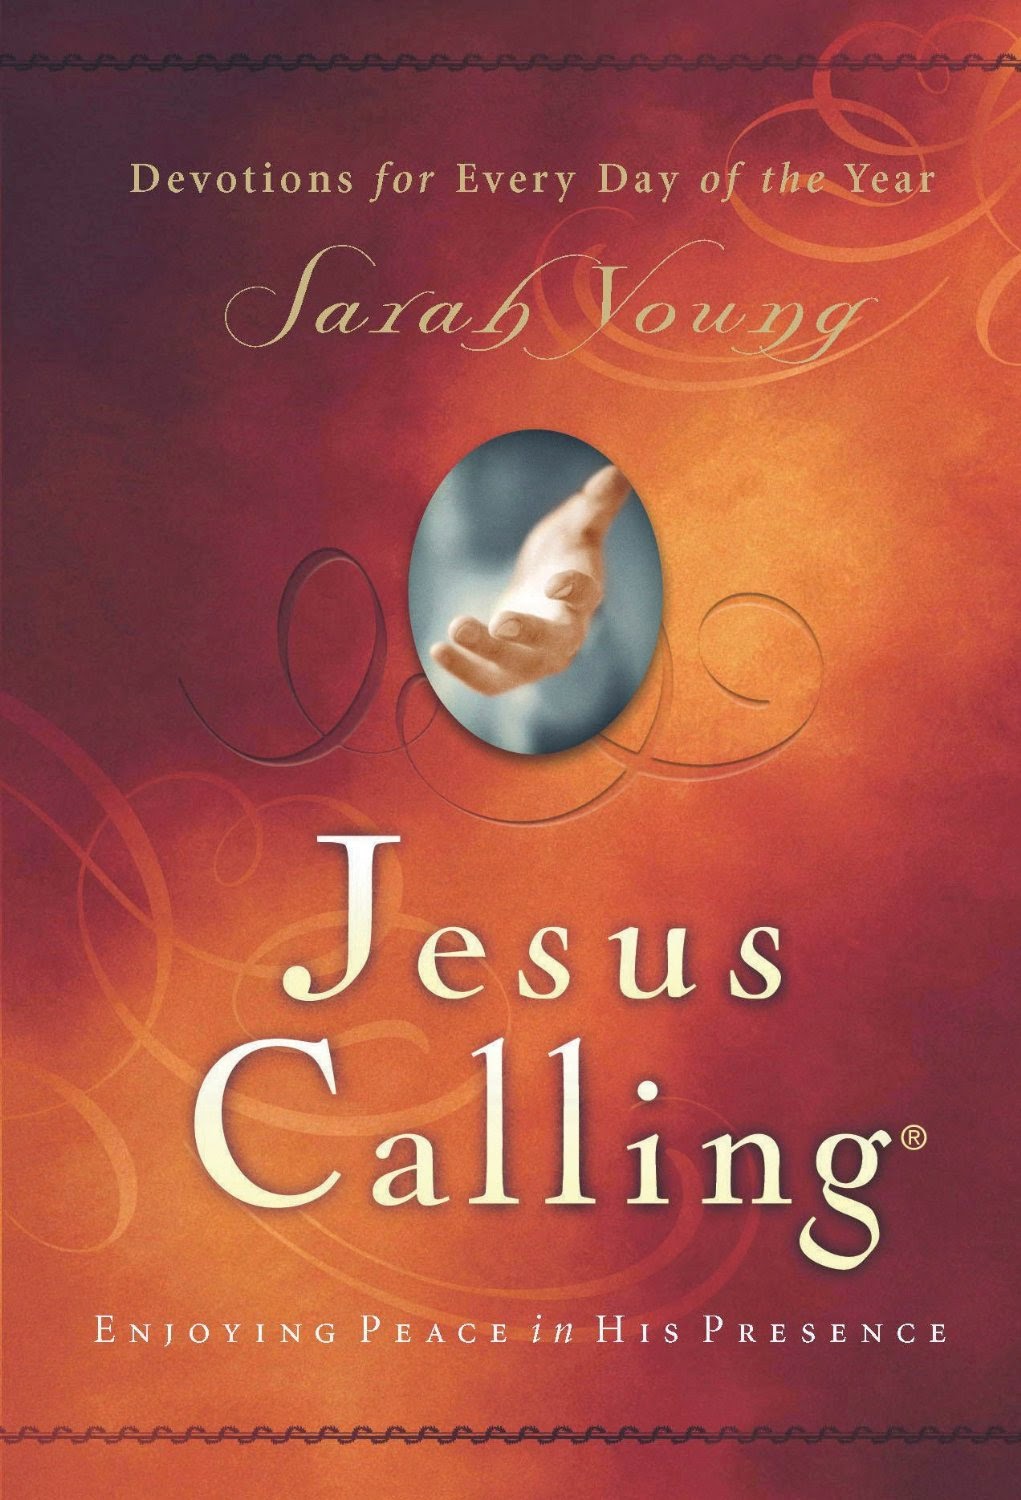 Jesus Calling Devotional by Sarah Young